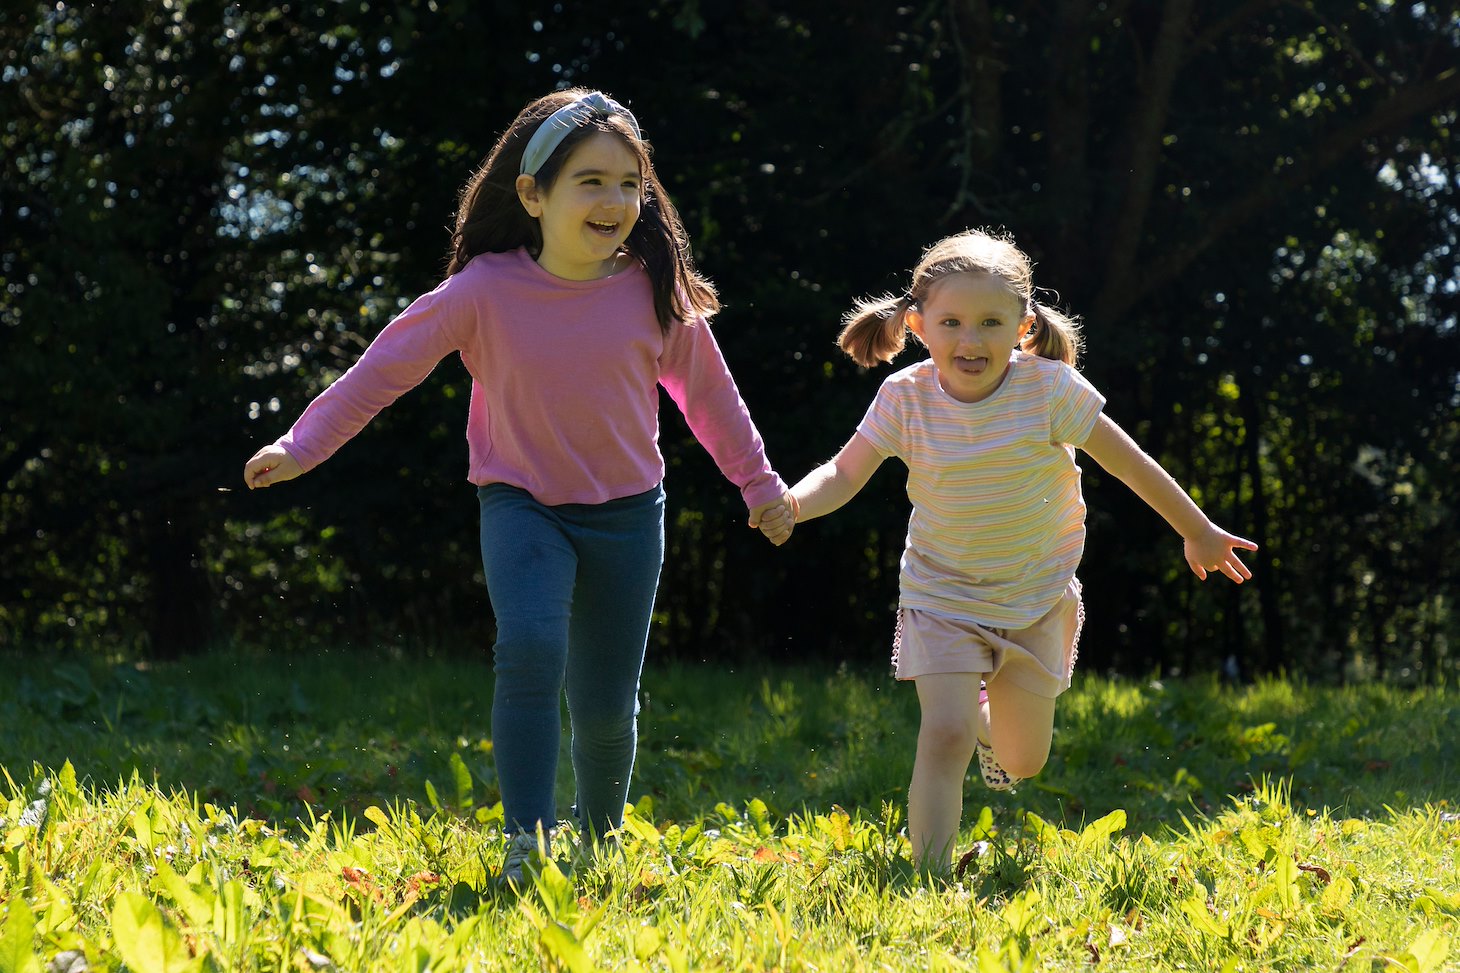 Two young girls running across woodlland glade, Dunblane